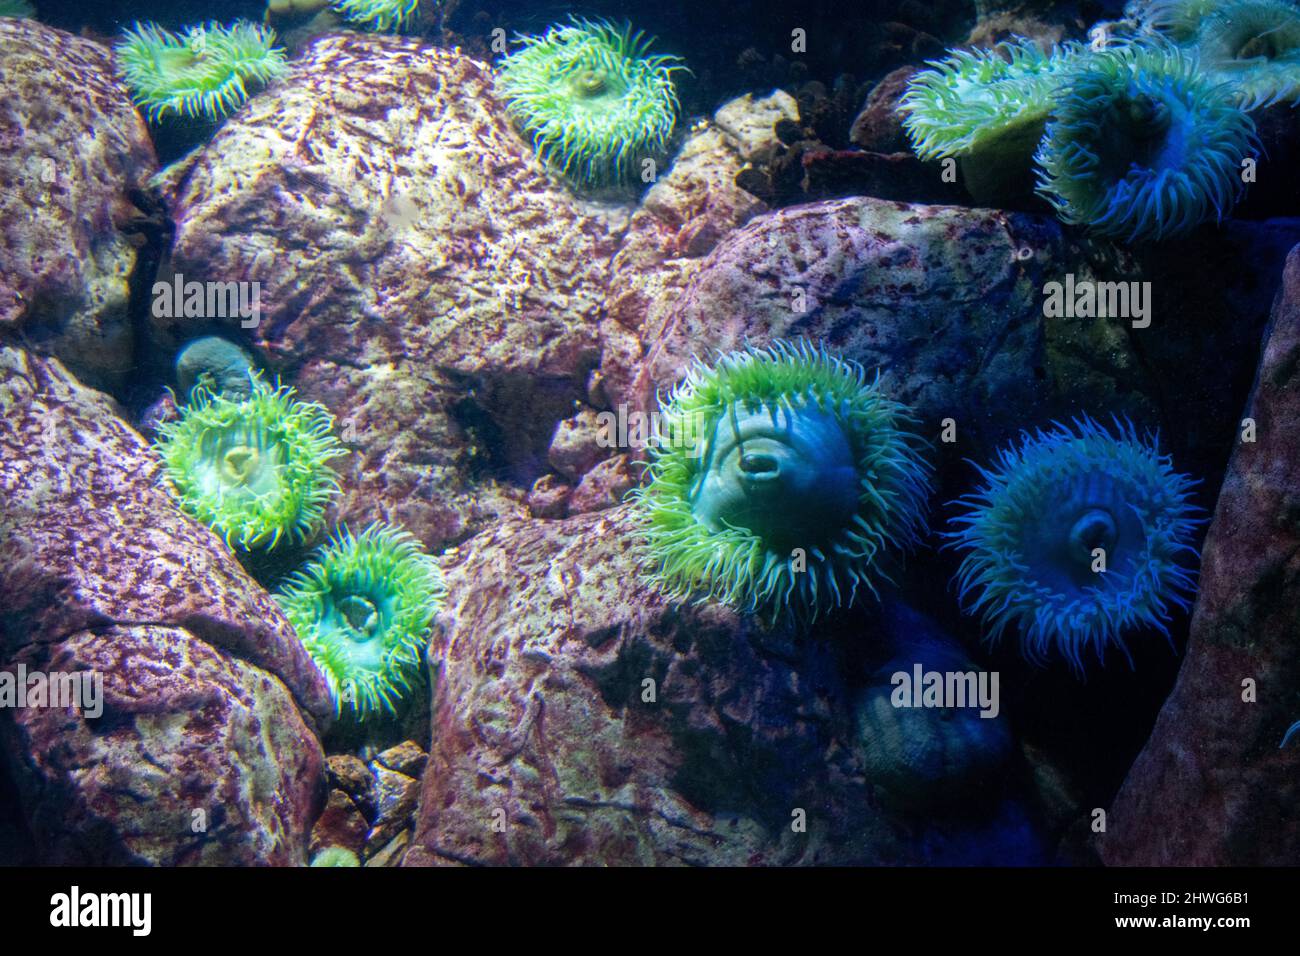 The sandy anemone (Bunodactis reynaudi) is a species of sea anemone in the family Actiniidae. Giant green anemone on reef at Oceanário Lisboa. Stock Photo